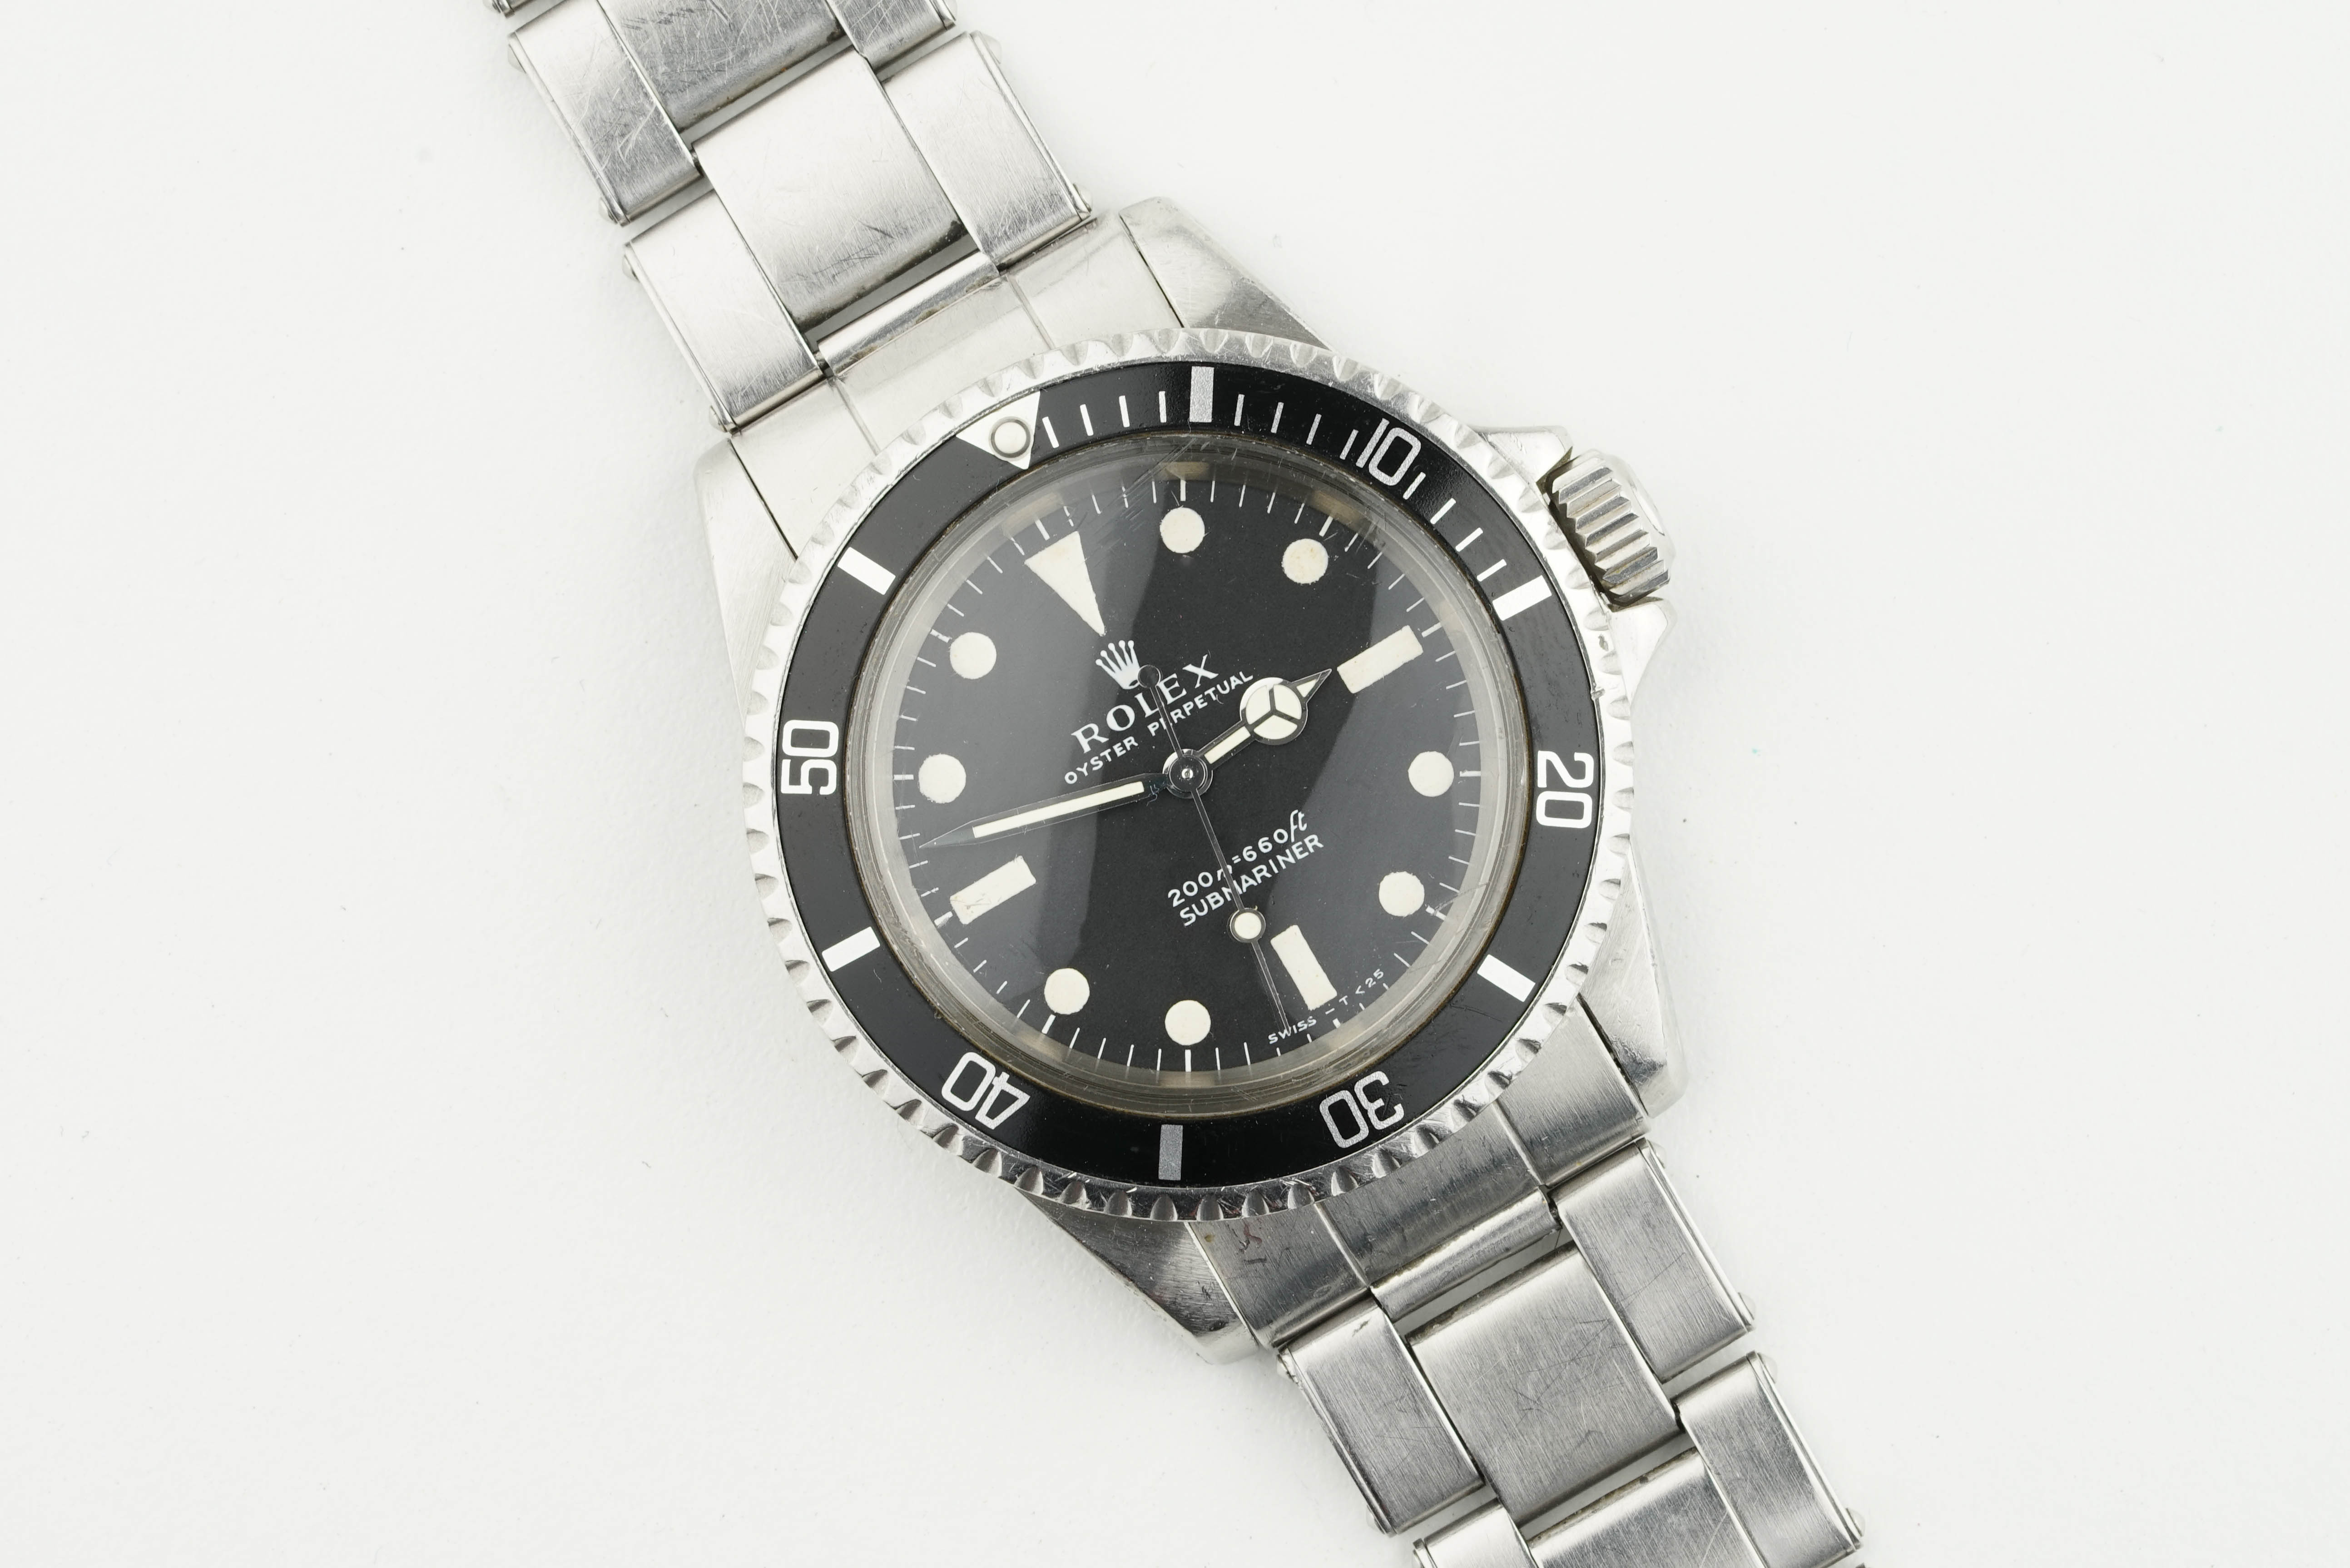 ROLEX OYSTER PERPETUAL SUBMARINER METERS FIRST DIAL 7206 RIVETED BRACELET W/ BOX & PAPERS REF. - Image 4 of 11